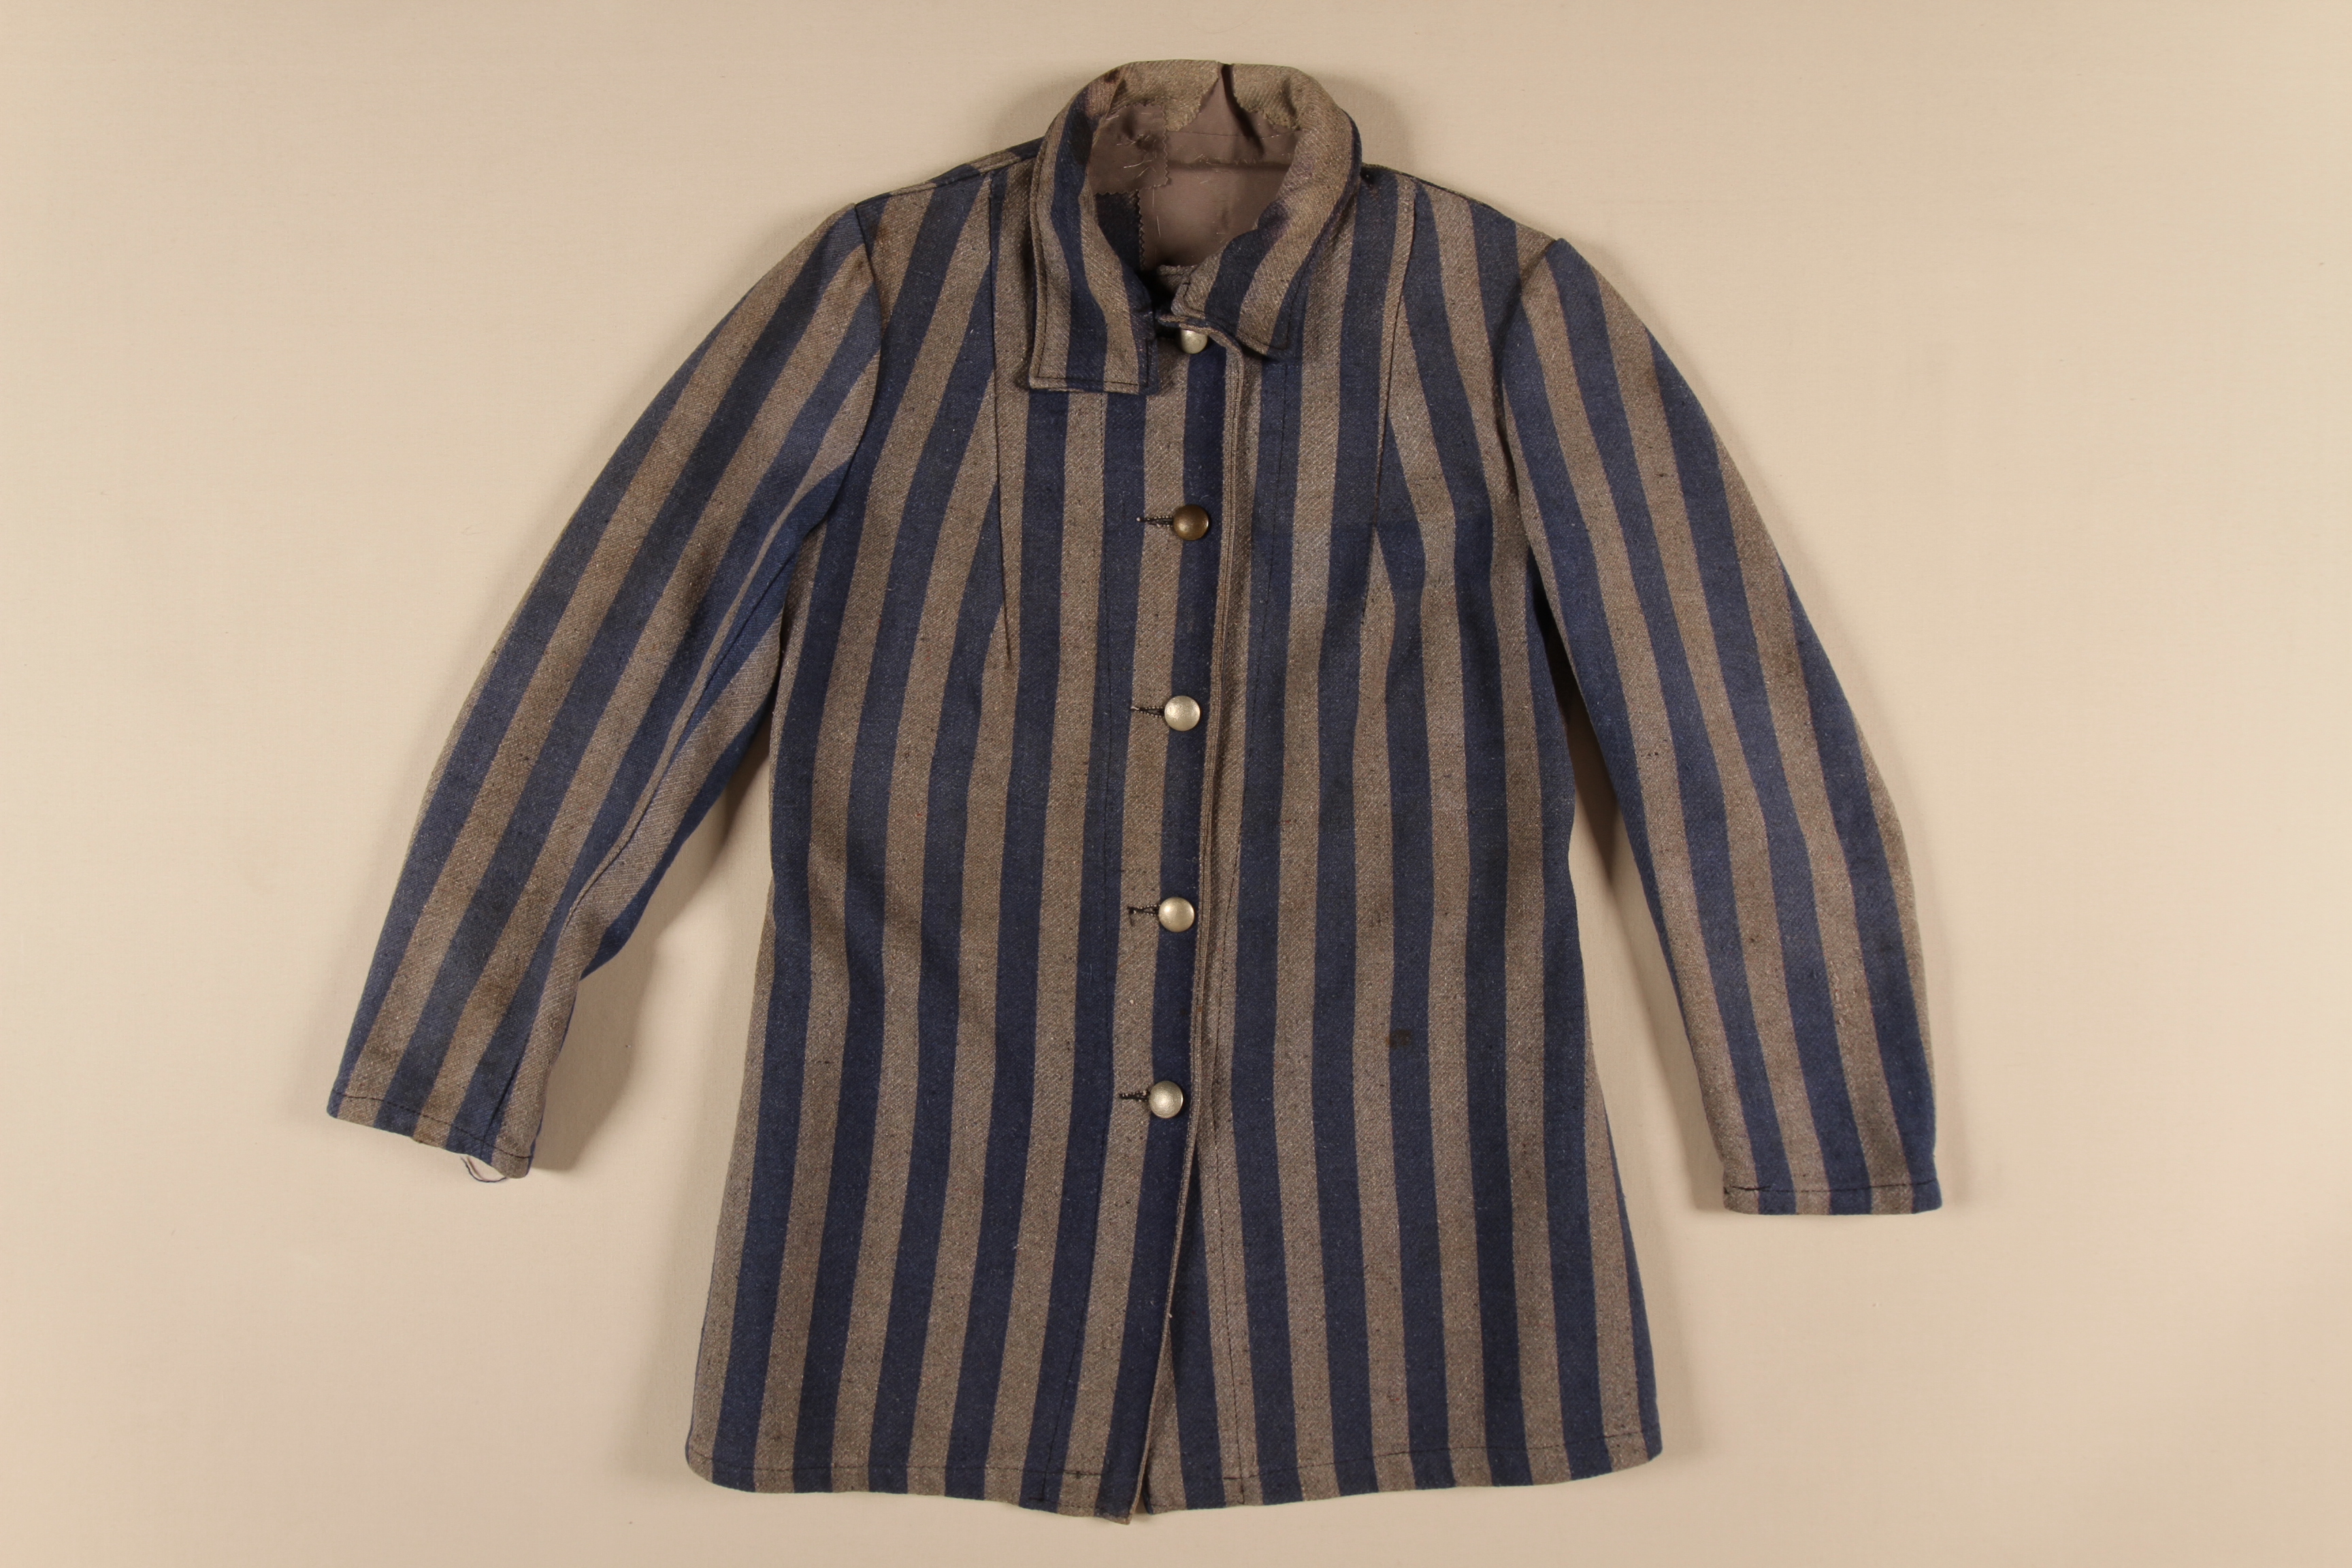 Uniform jacket worn by William Luksenburg while imprisoned in forced labor camps.